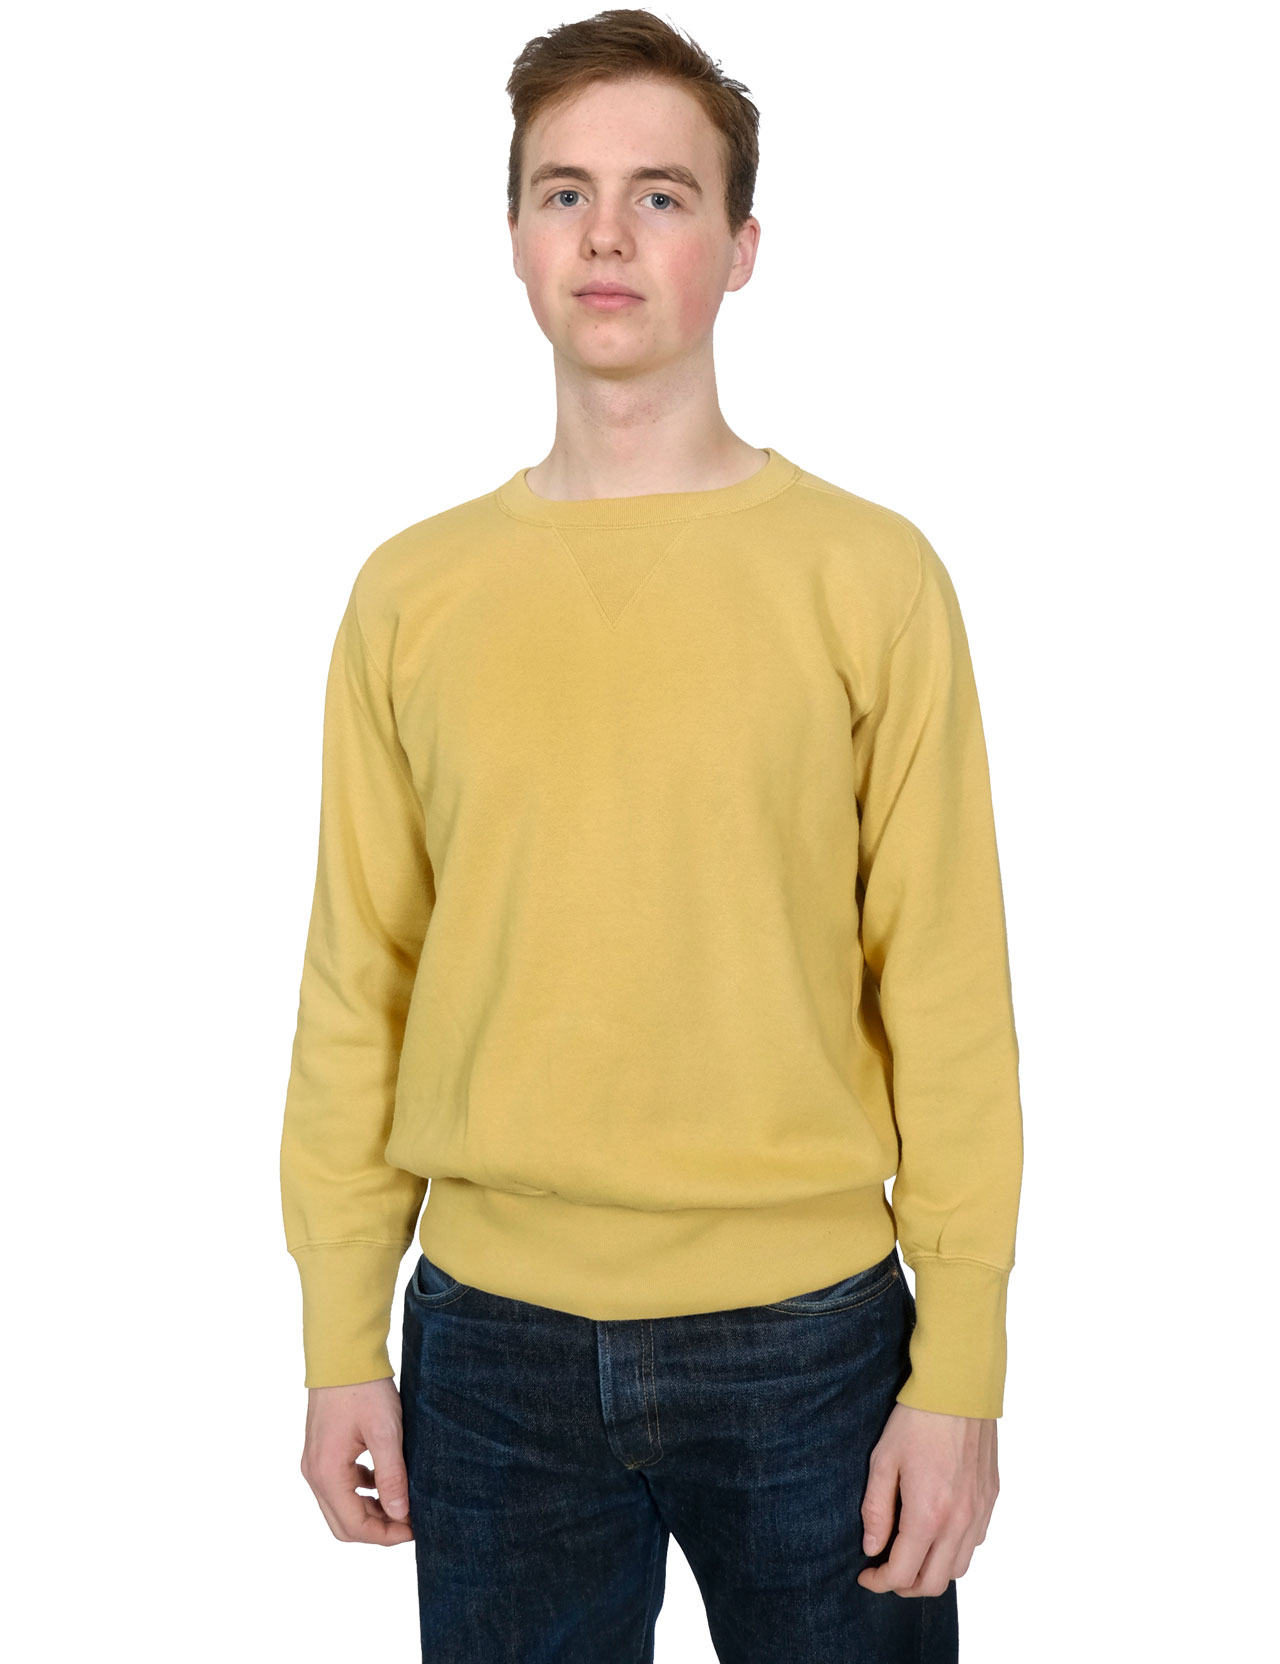 Levis Vintage Clothing - Bay Meadow Sweatshirt - Southern Moss